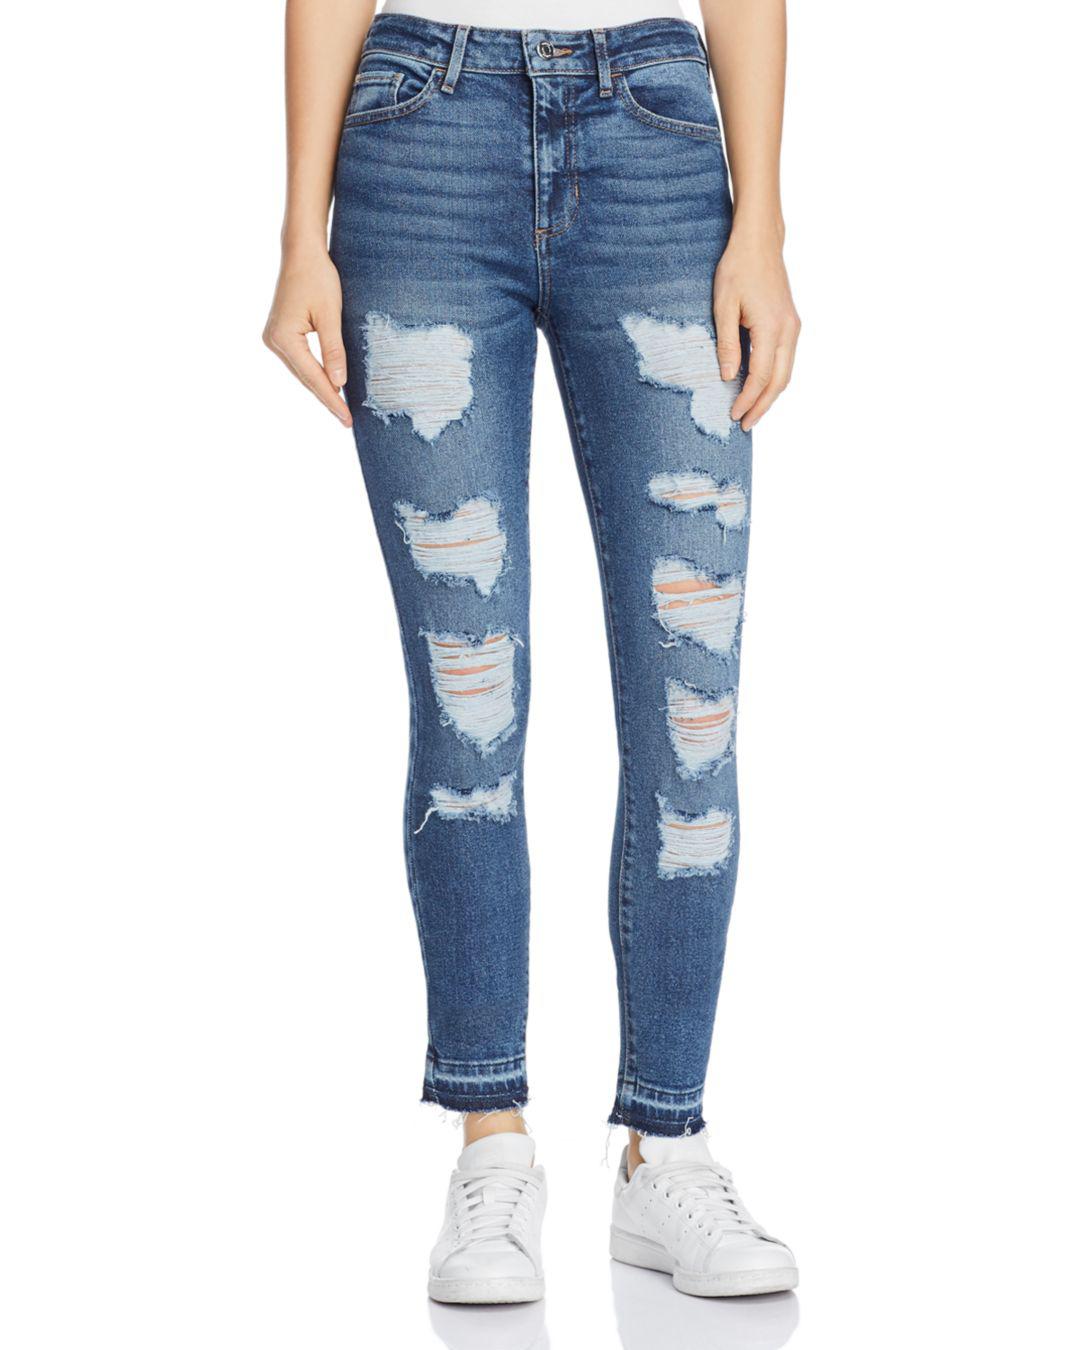 Guess Denim 1981 Destroyed Skinny Jeans In Bayside Light in Blue - Lyst